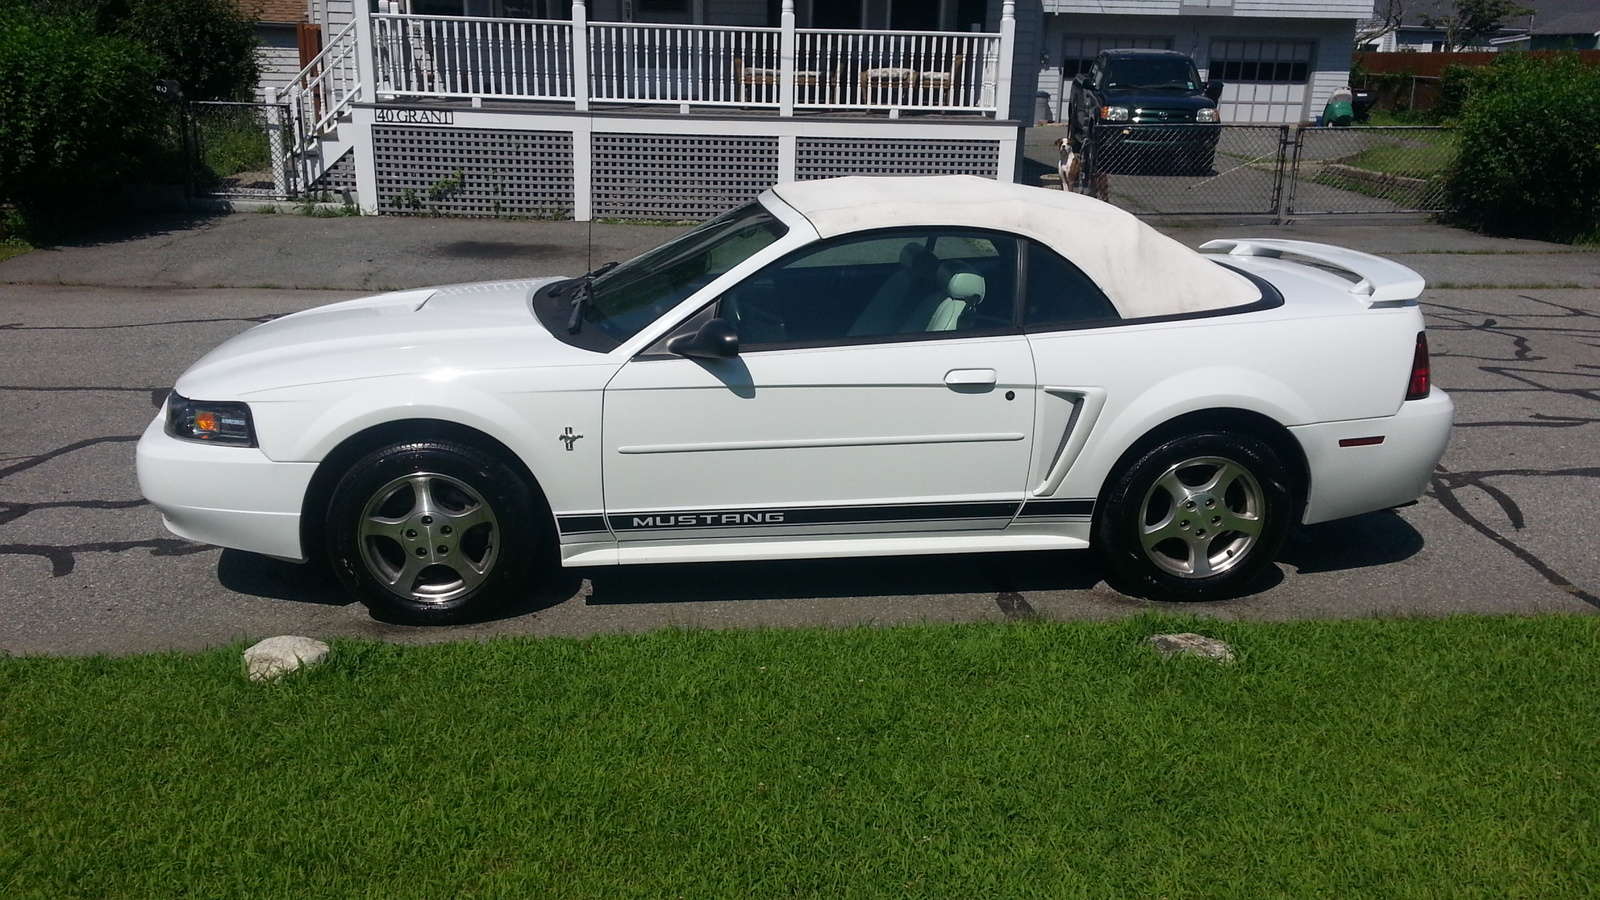 2002 Ford mustang deluxe convertible reviews #2